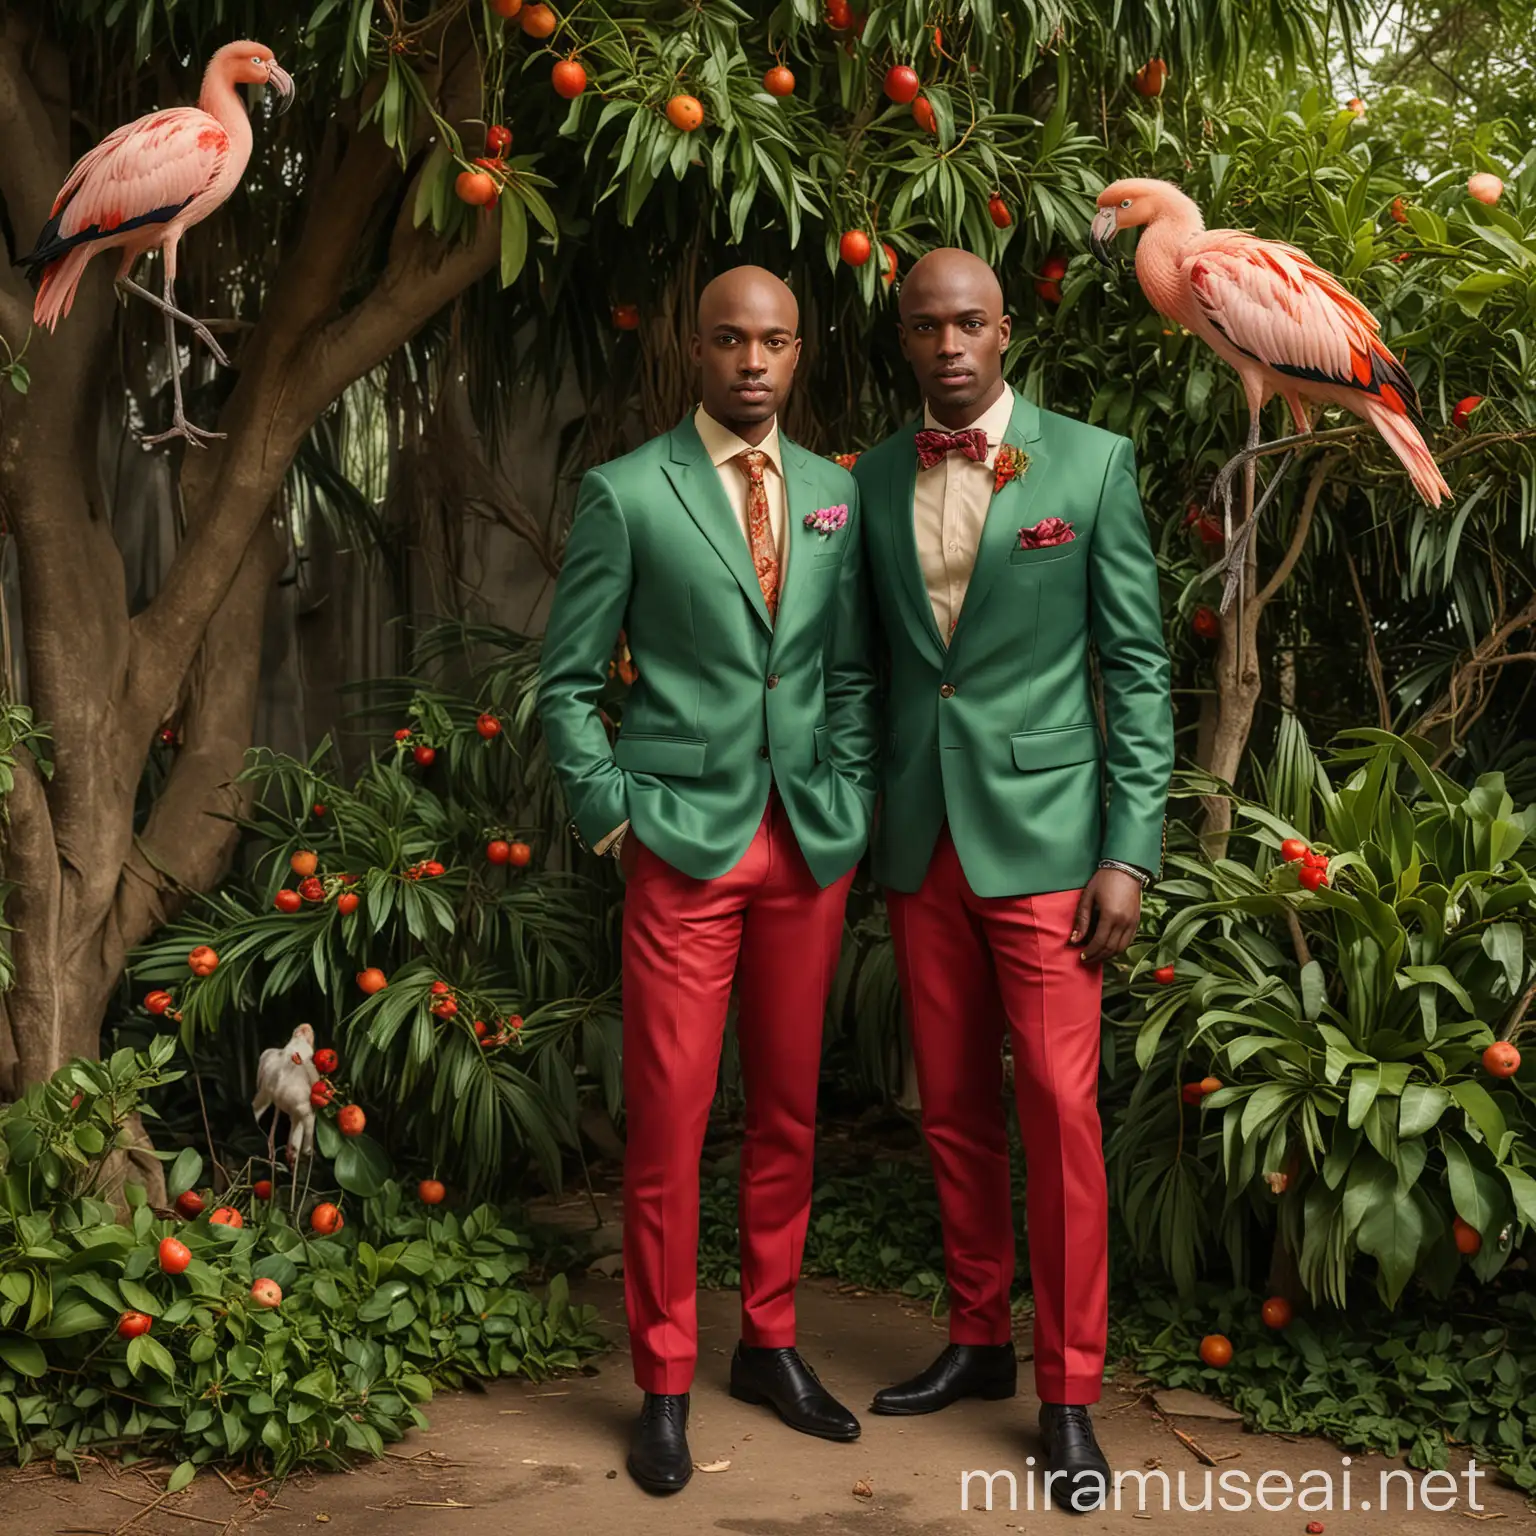 In the ambience of a Photostudio with a golden Background. Two black men. One with short very blond Hair with a petrol green colored jacket and a long skirt in petrol green. The other Black man tall with bald head and a red colored suit on.  Dark Ambience with Spotlights on the men. Standing in front of an apple tree with many leaves. With Flamingos and Parrots. And two beautiful lions surrounding the two men.

